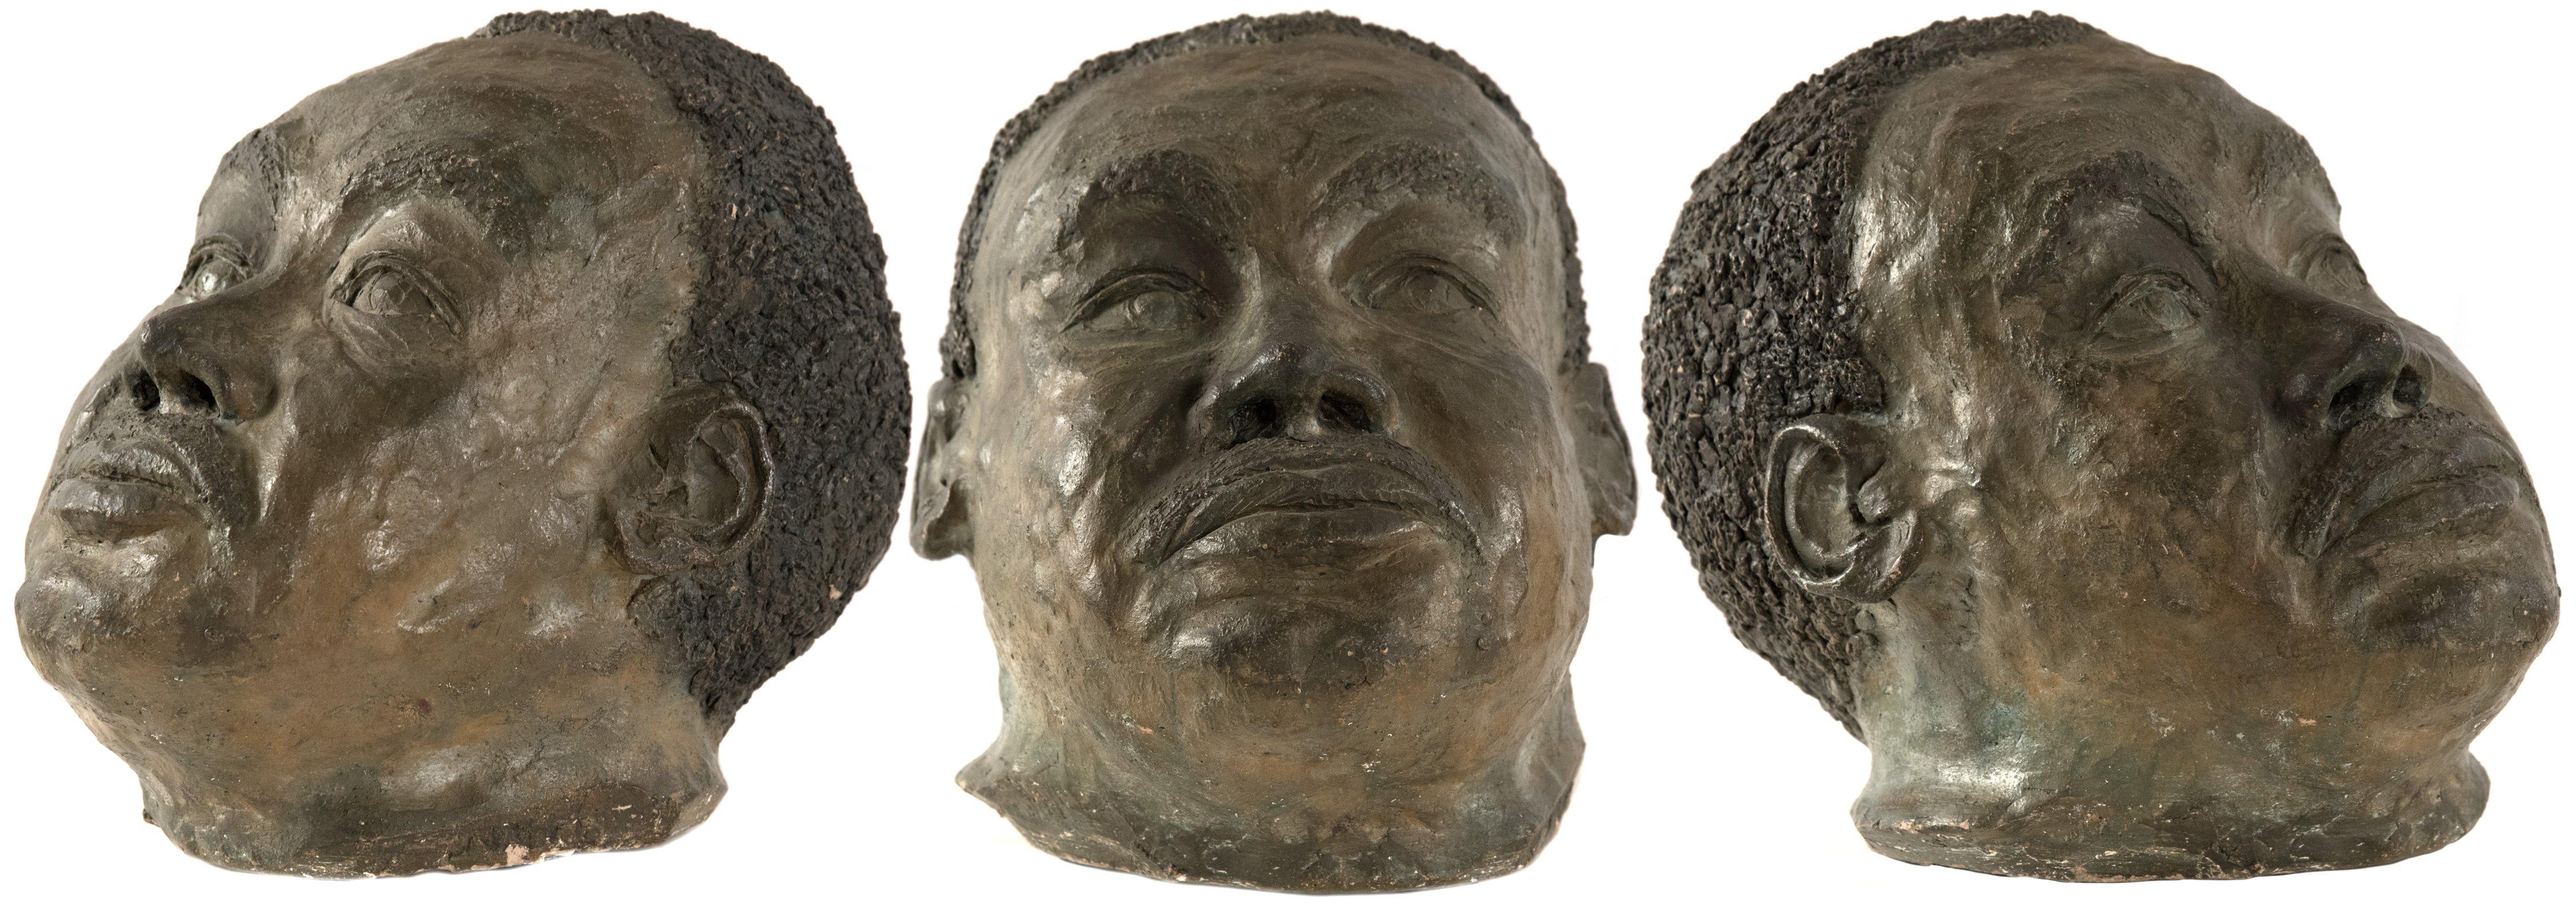 A Bust of the Boxer Joe Louis by Mahonri Young For Sale 1